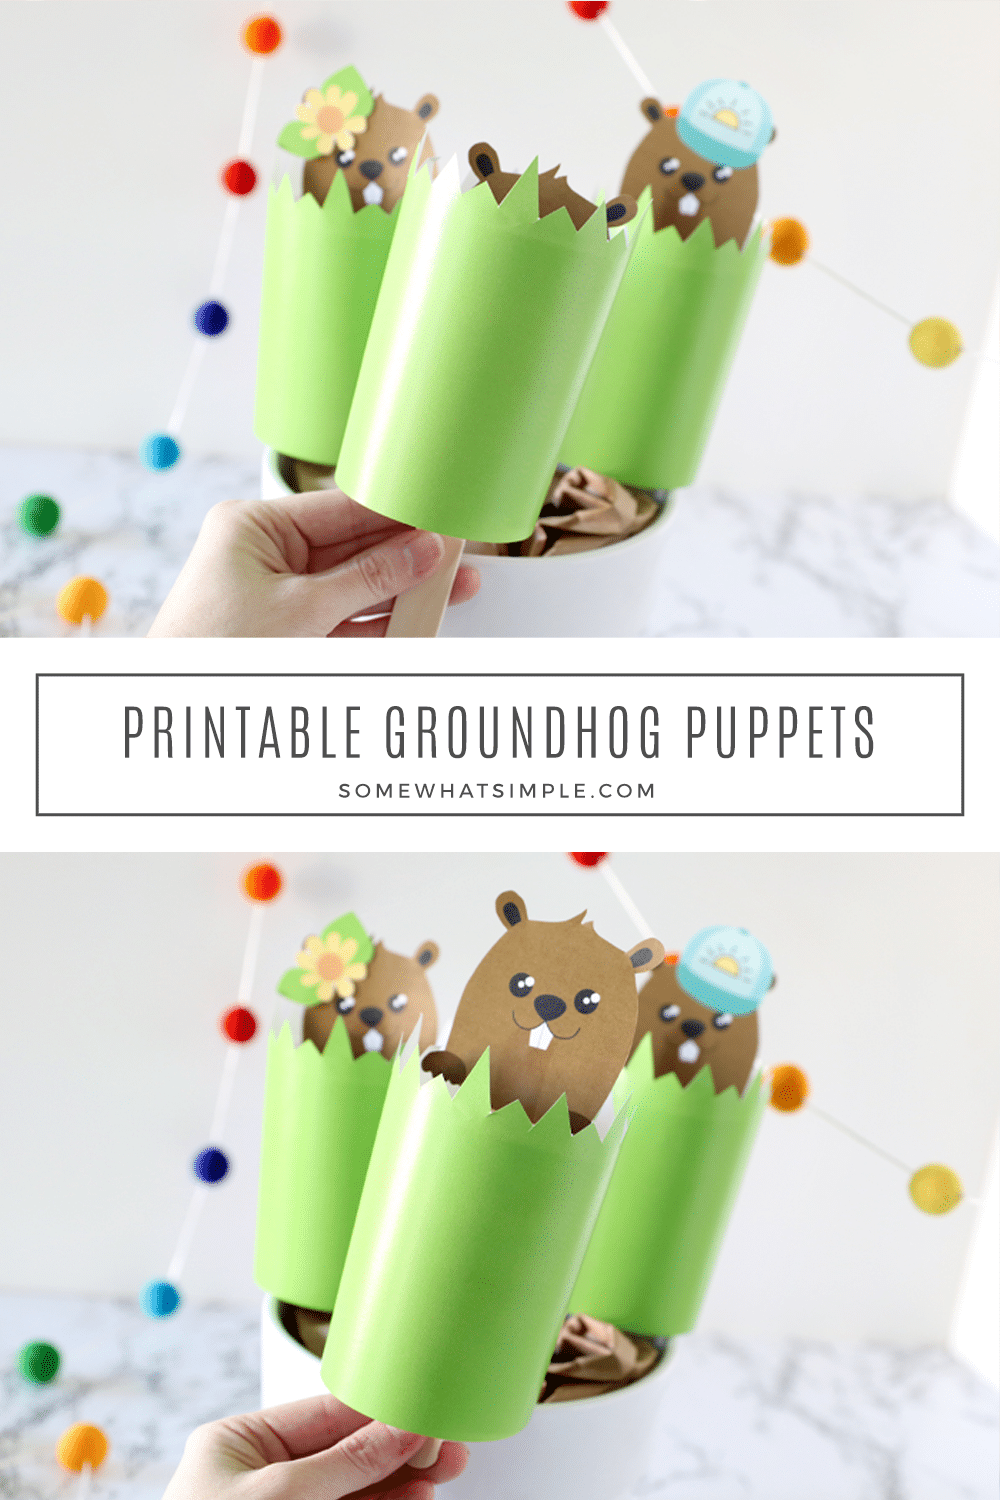 Grab the kids + a few basic craft supplies and make this cute little groundhog stick puppet for Groundhog's Day! via @somewhatsimple